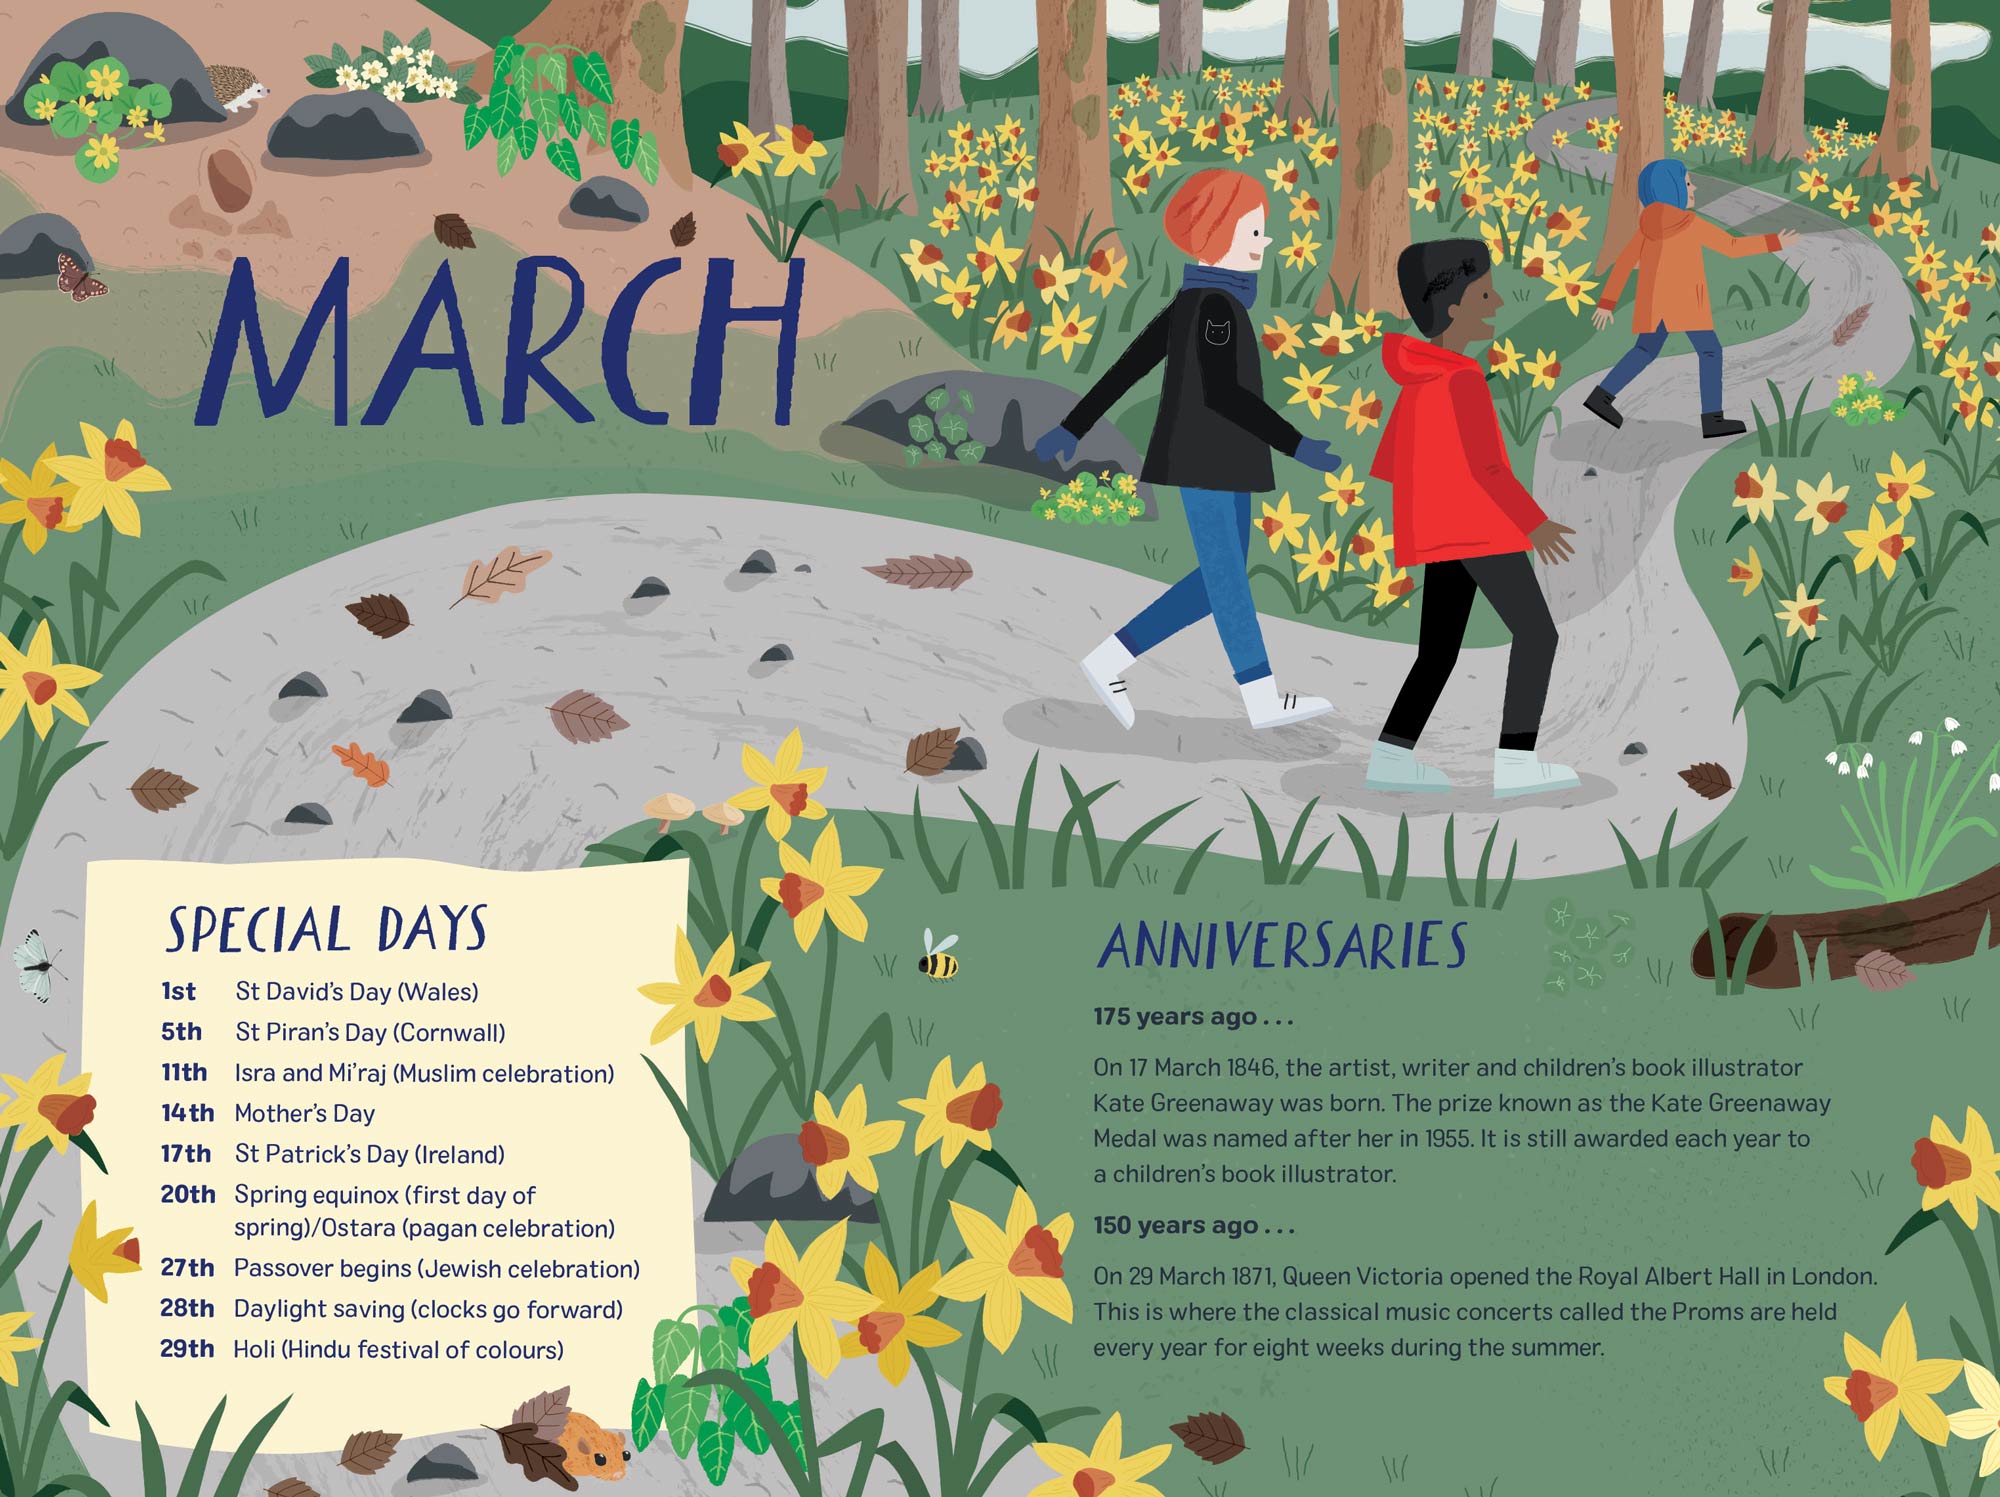 March chapter opener for 2021 Nature Month by Month